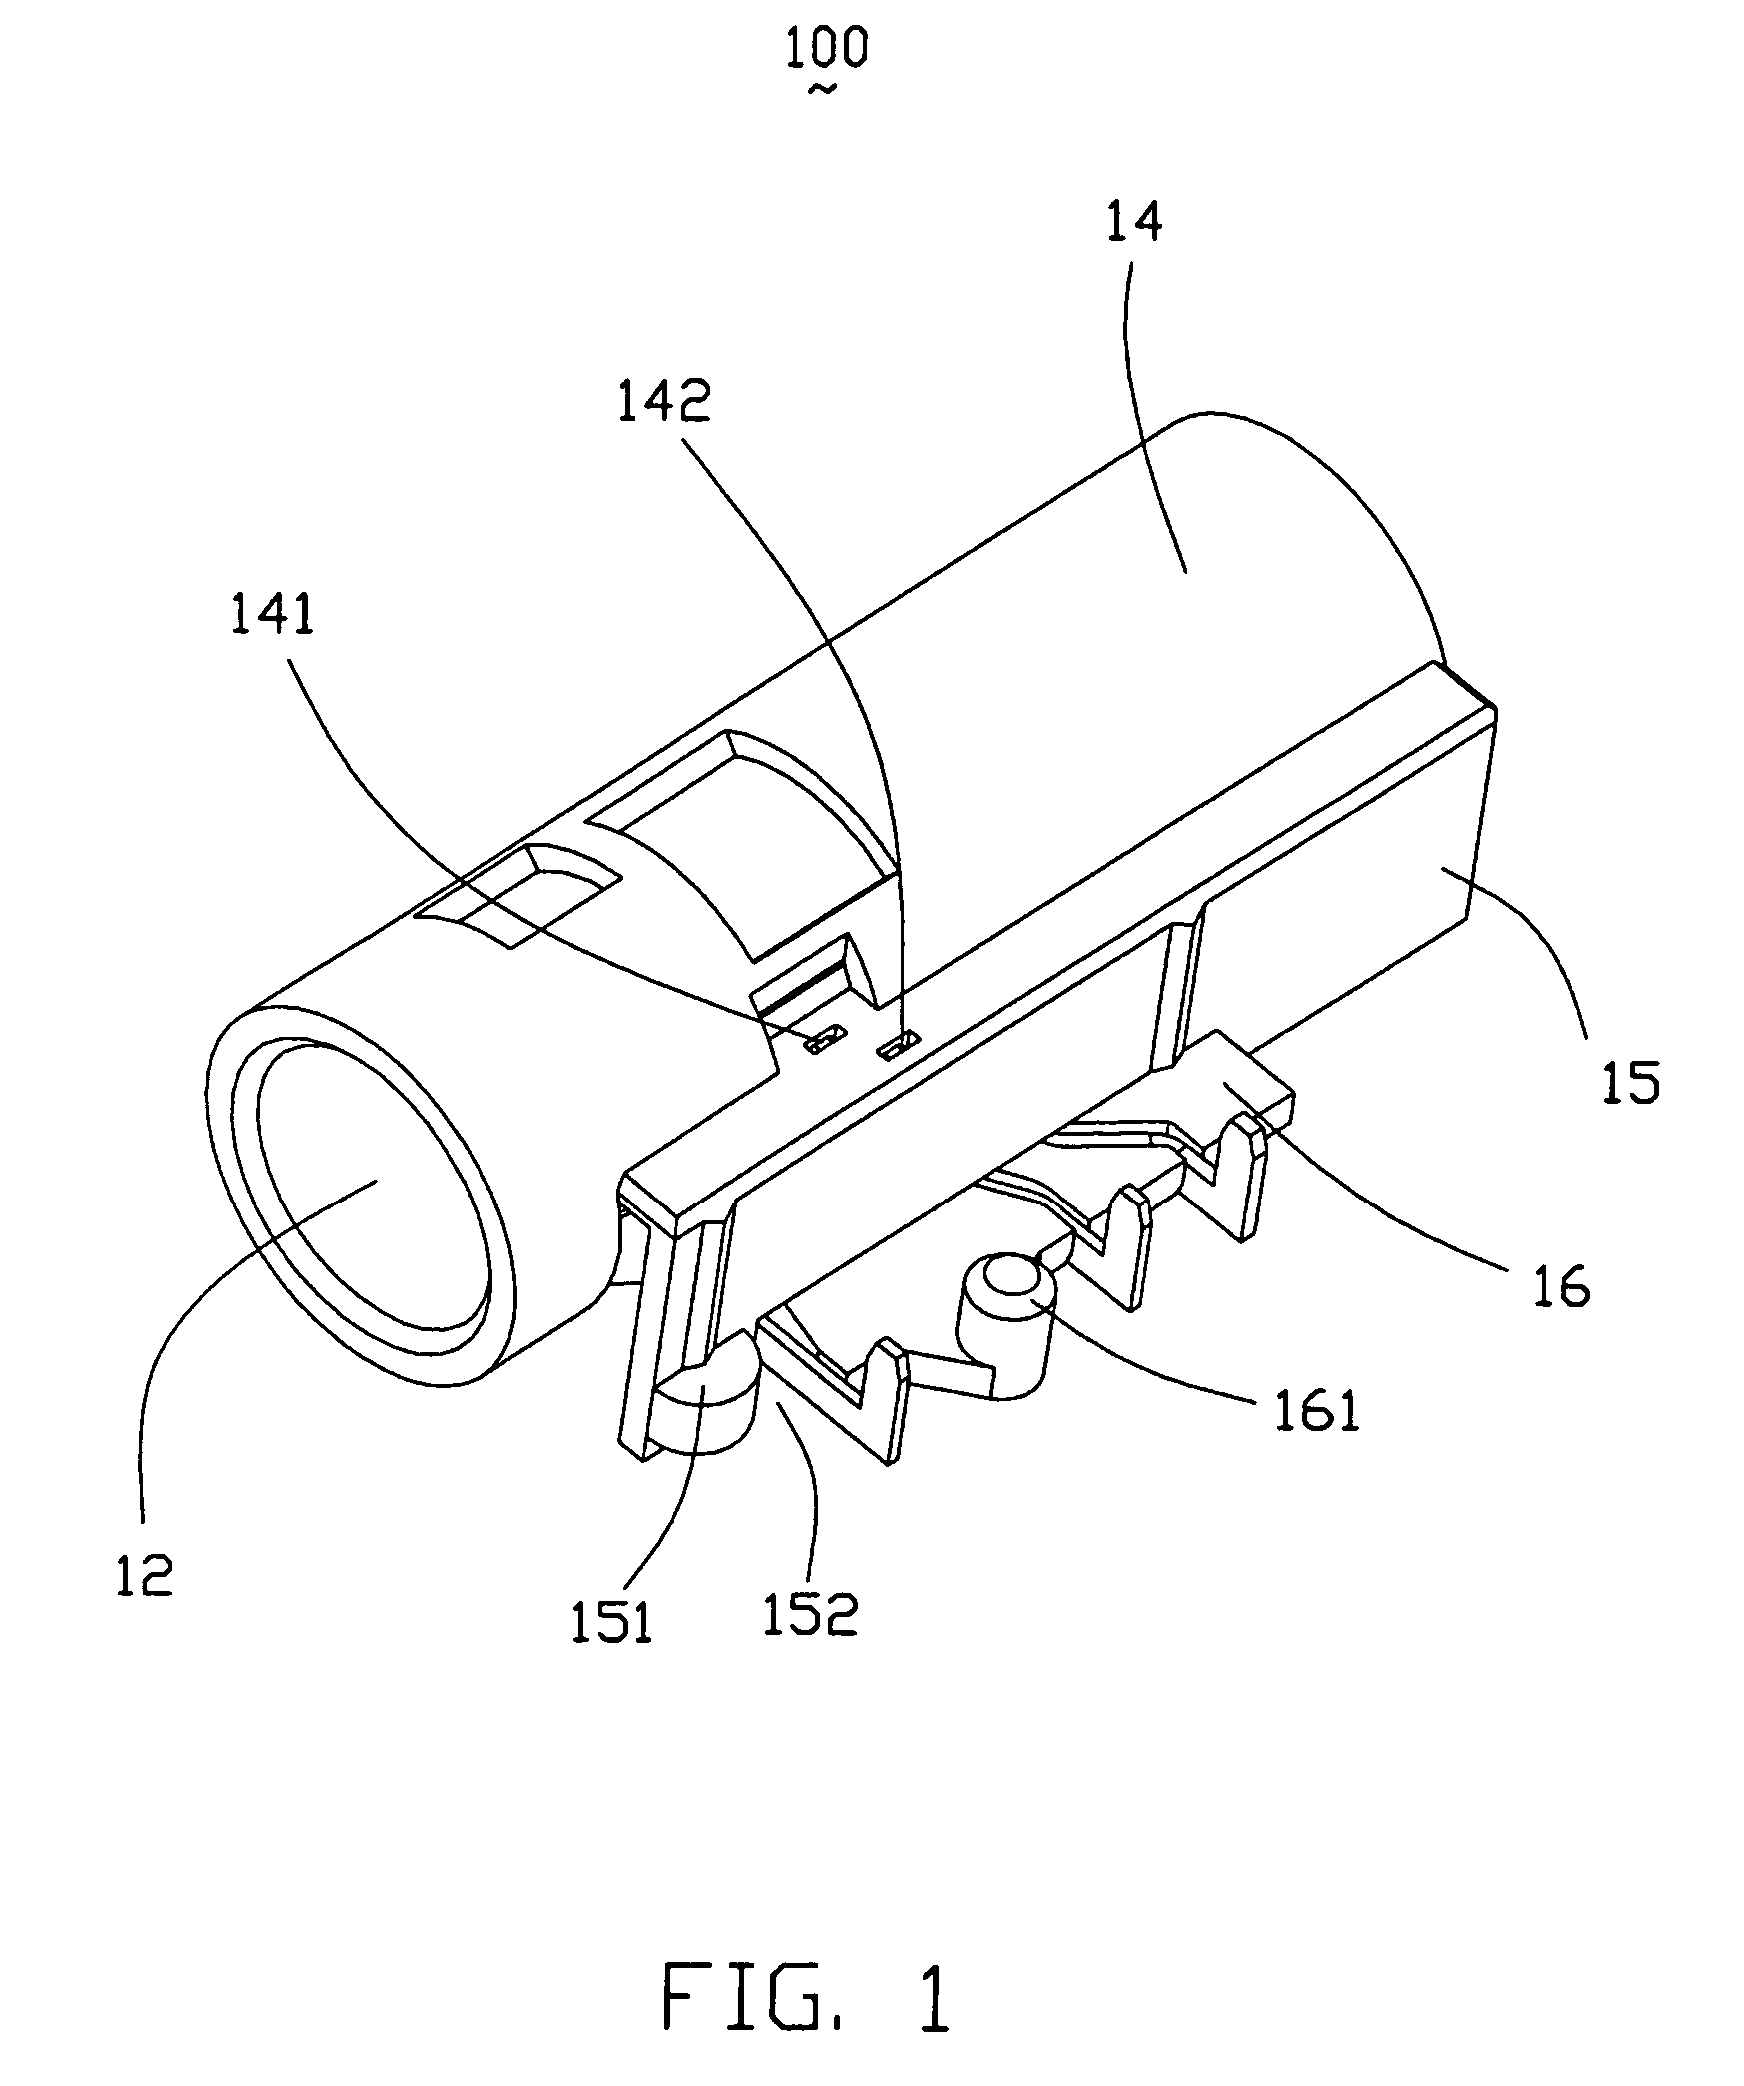 Miniature audio jack connector with improved contact arrangement